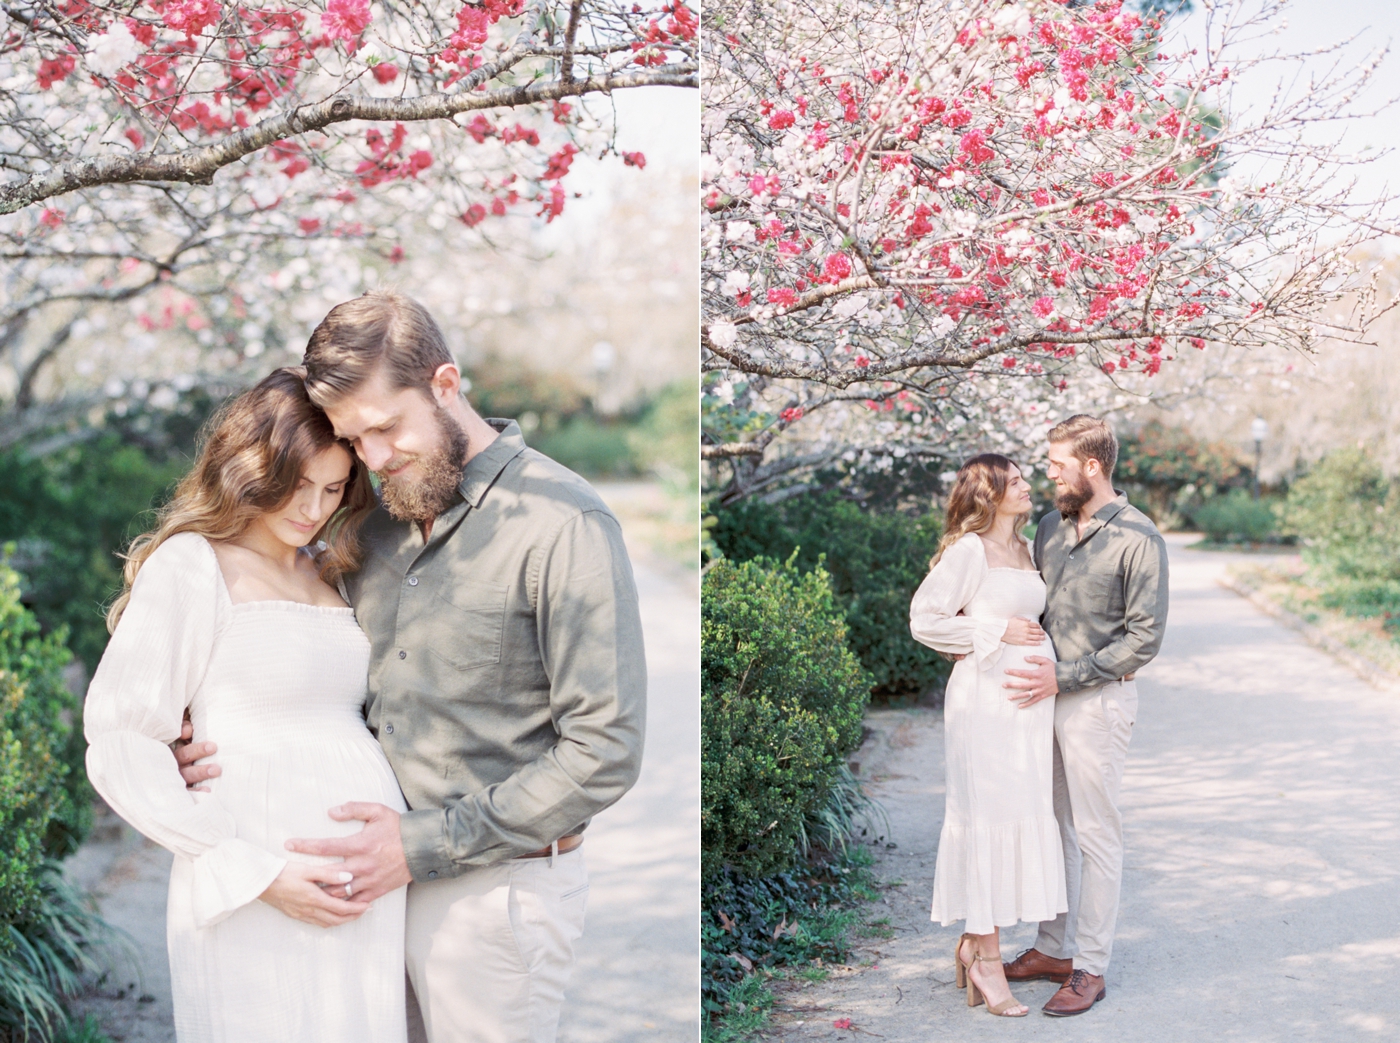 Maternity portraits in Hampton Park under flowering trees on fuji400h film by Caitlyn Motycka Photography.